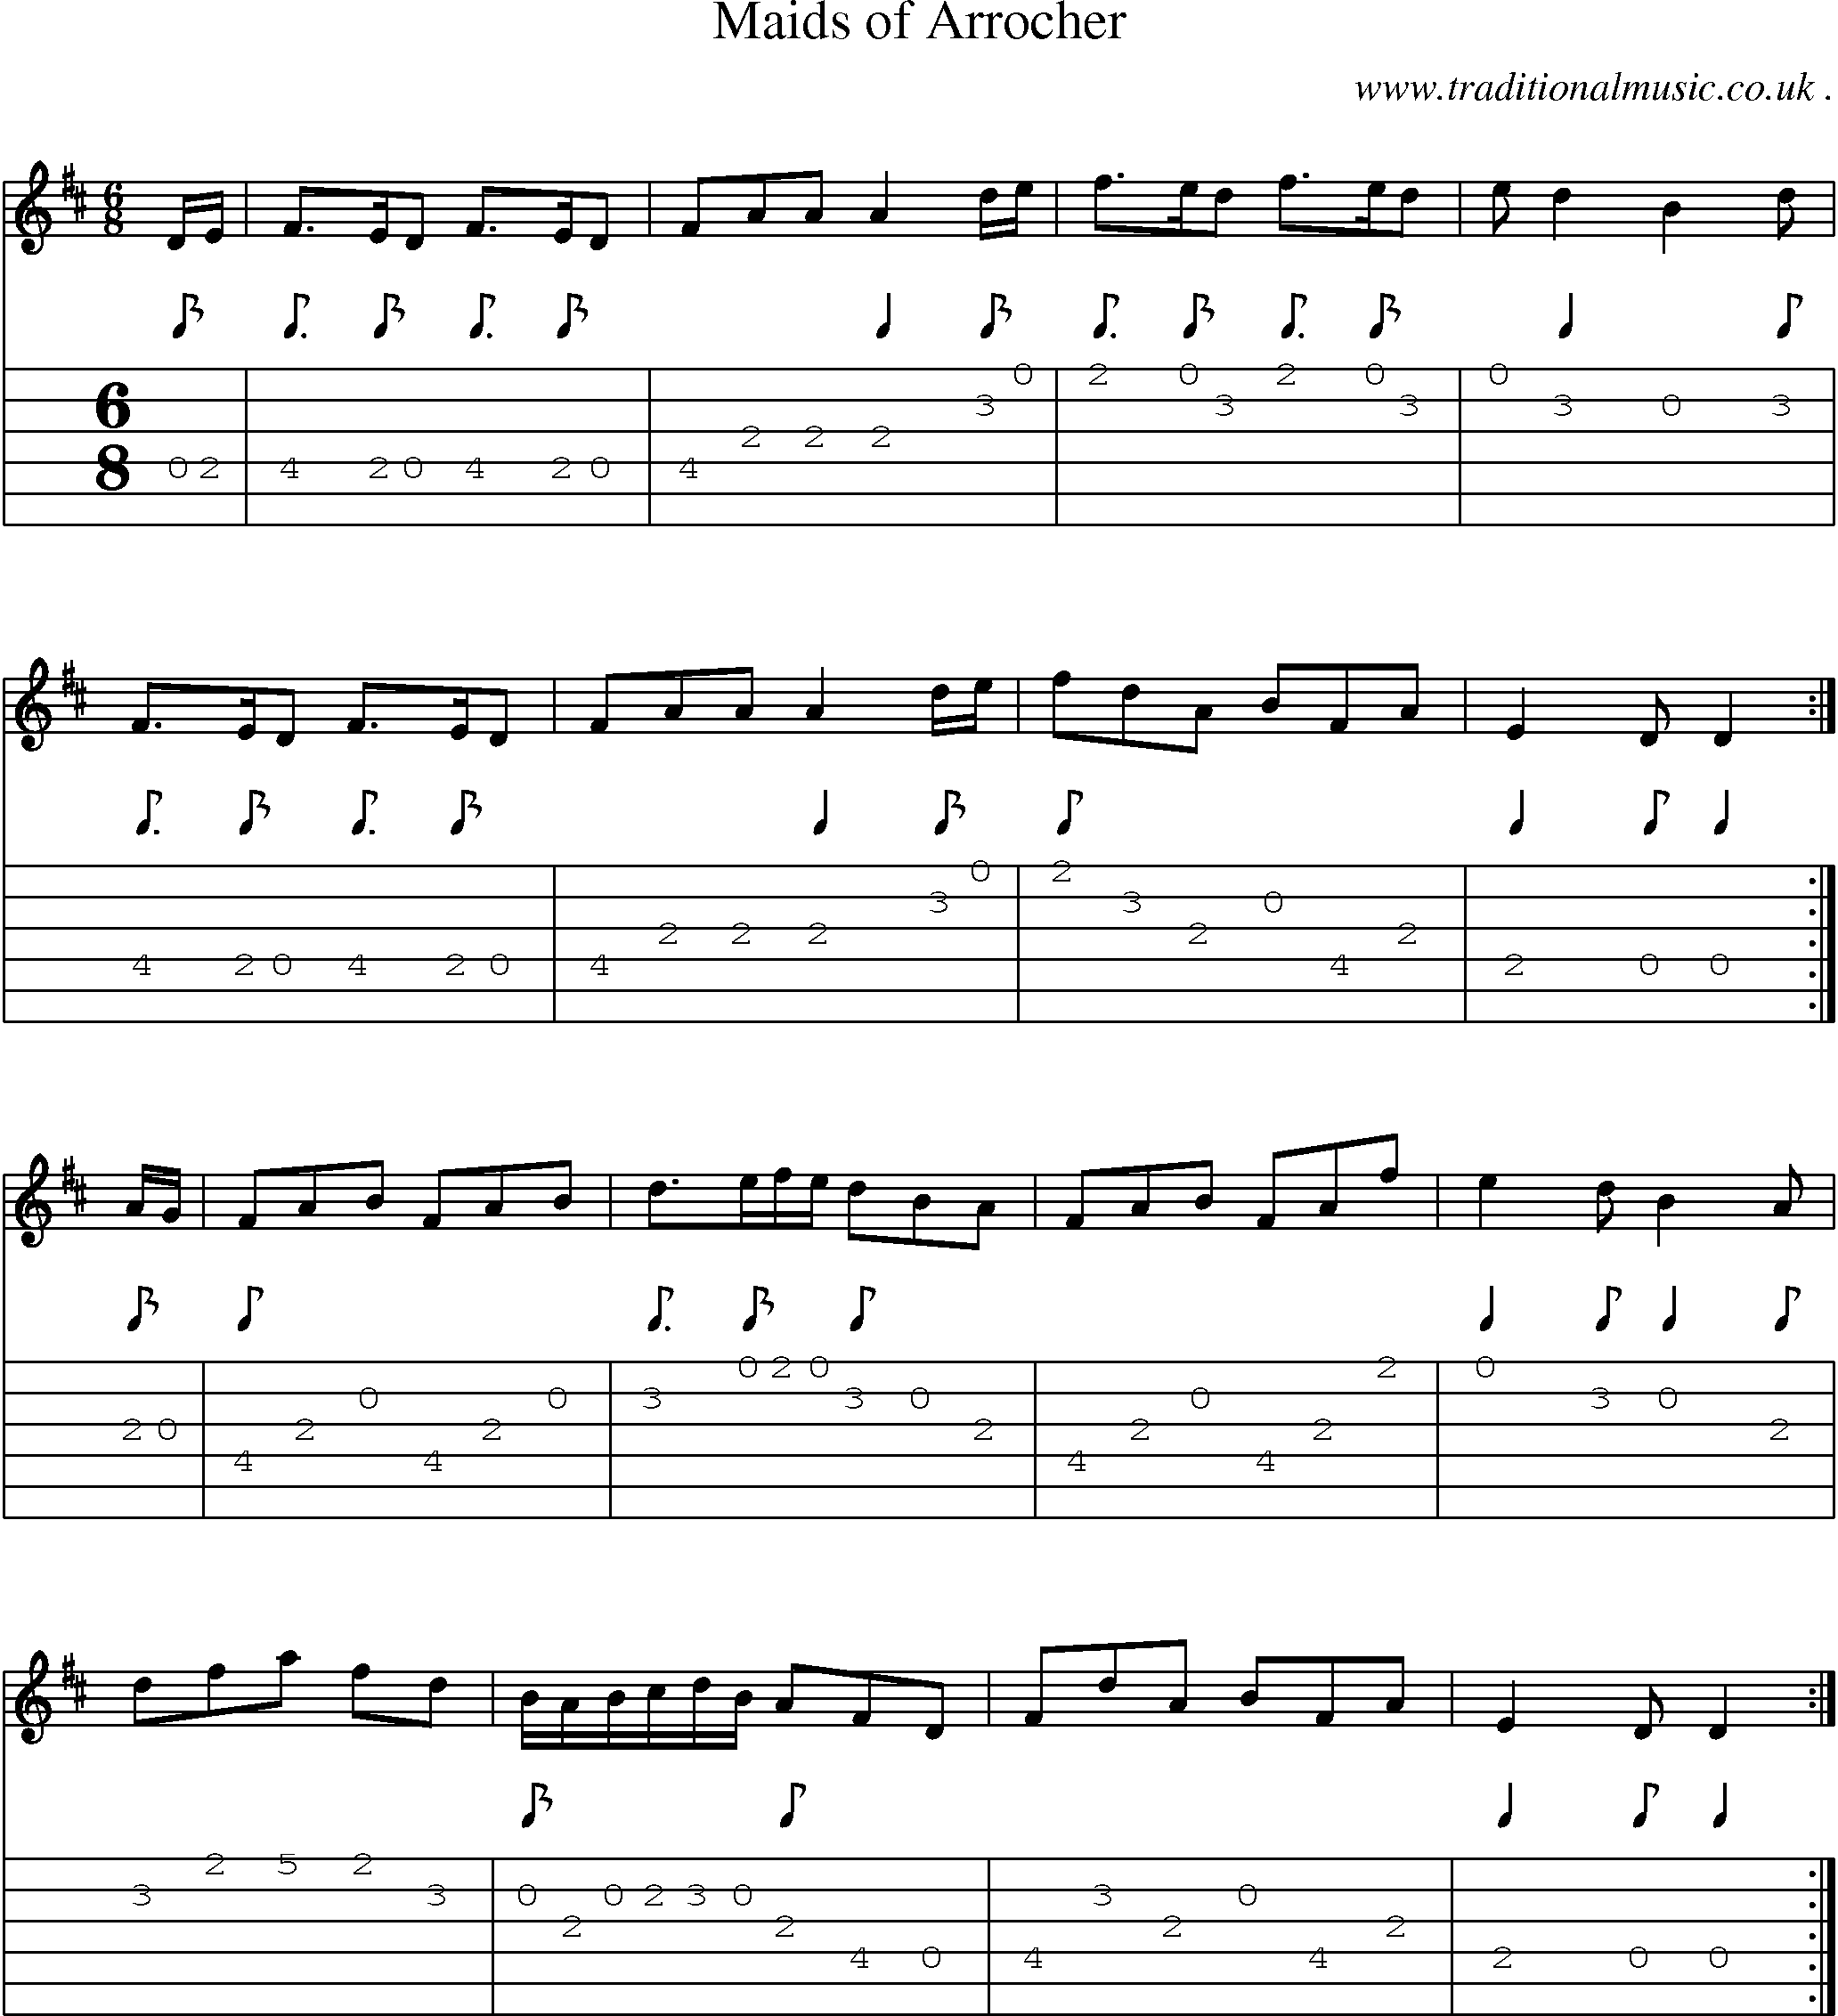 Sheet-music  score, Chords and Guitar Tabs for Maids Of Arrocher